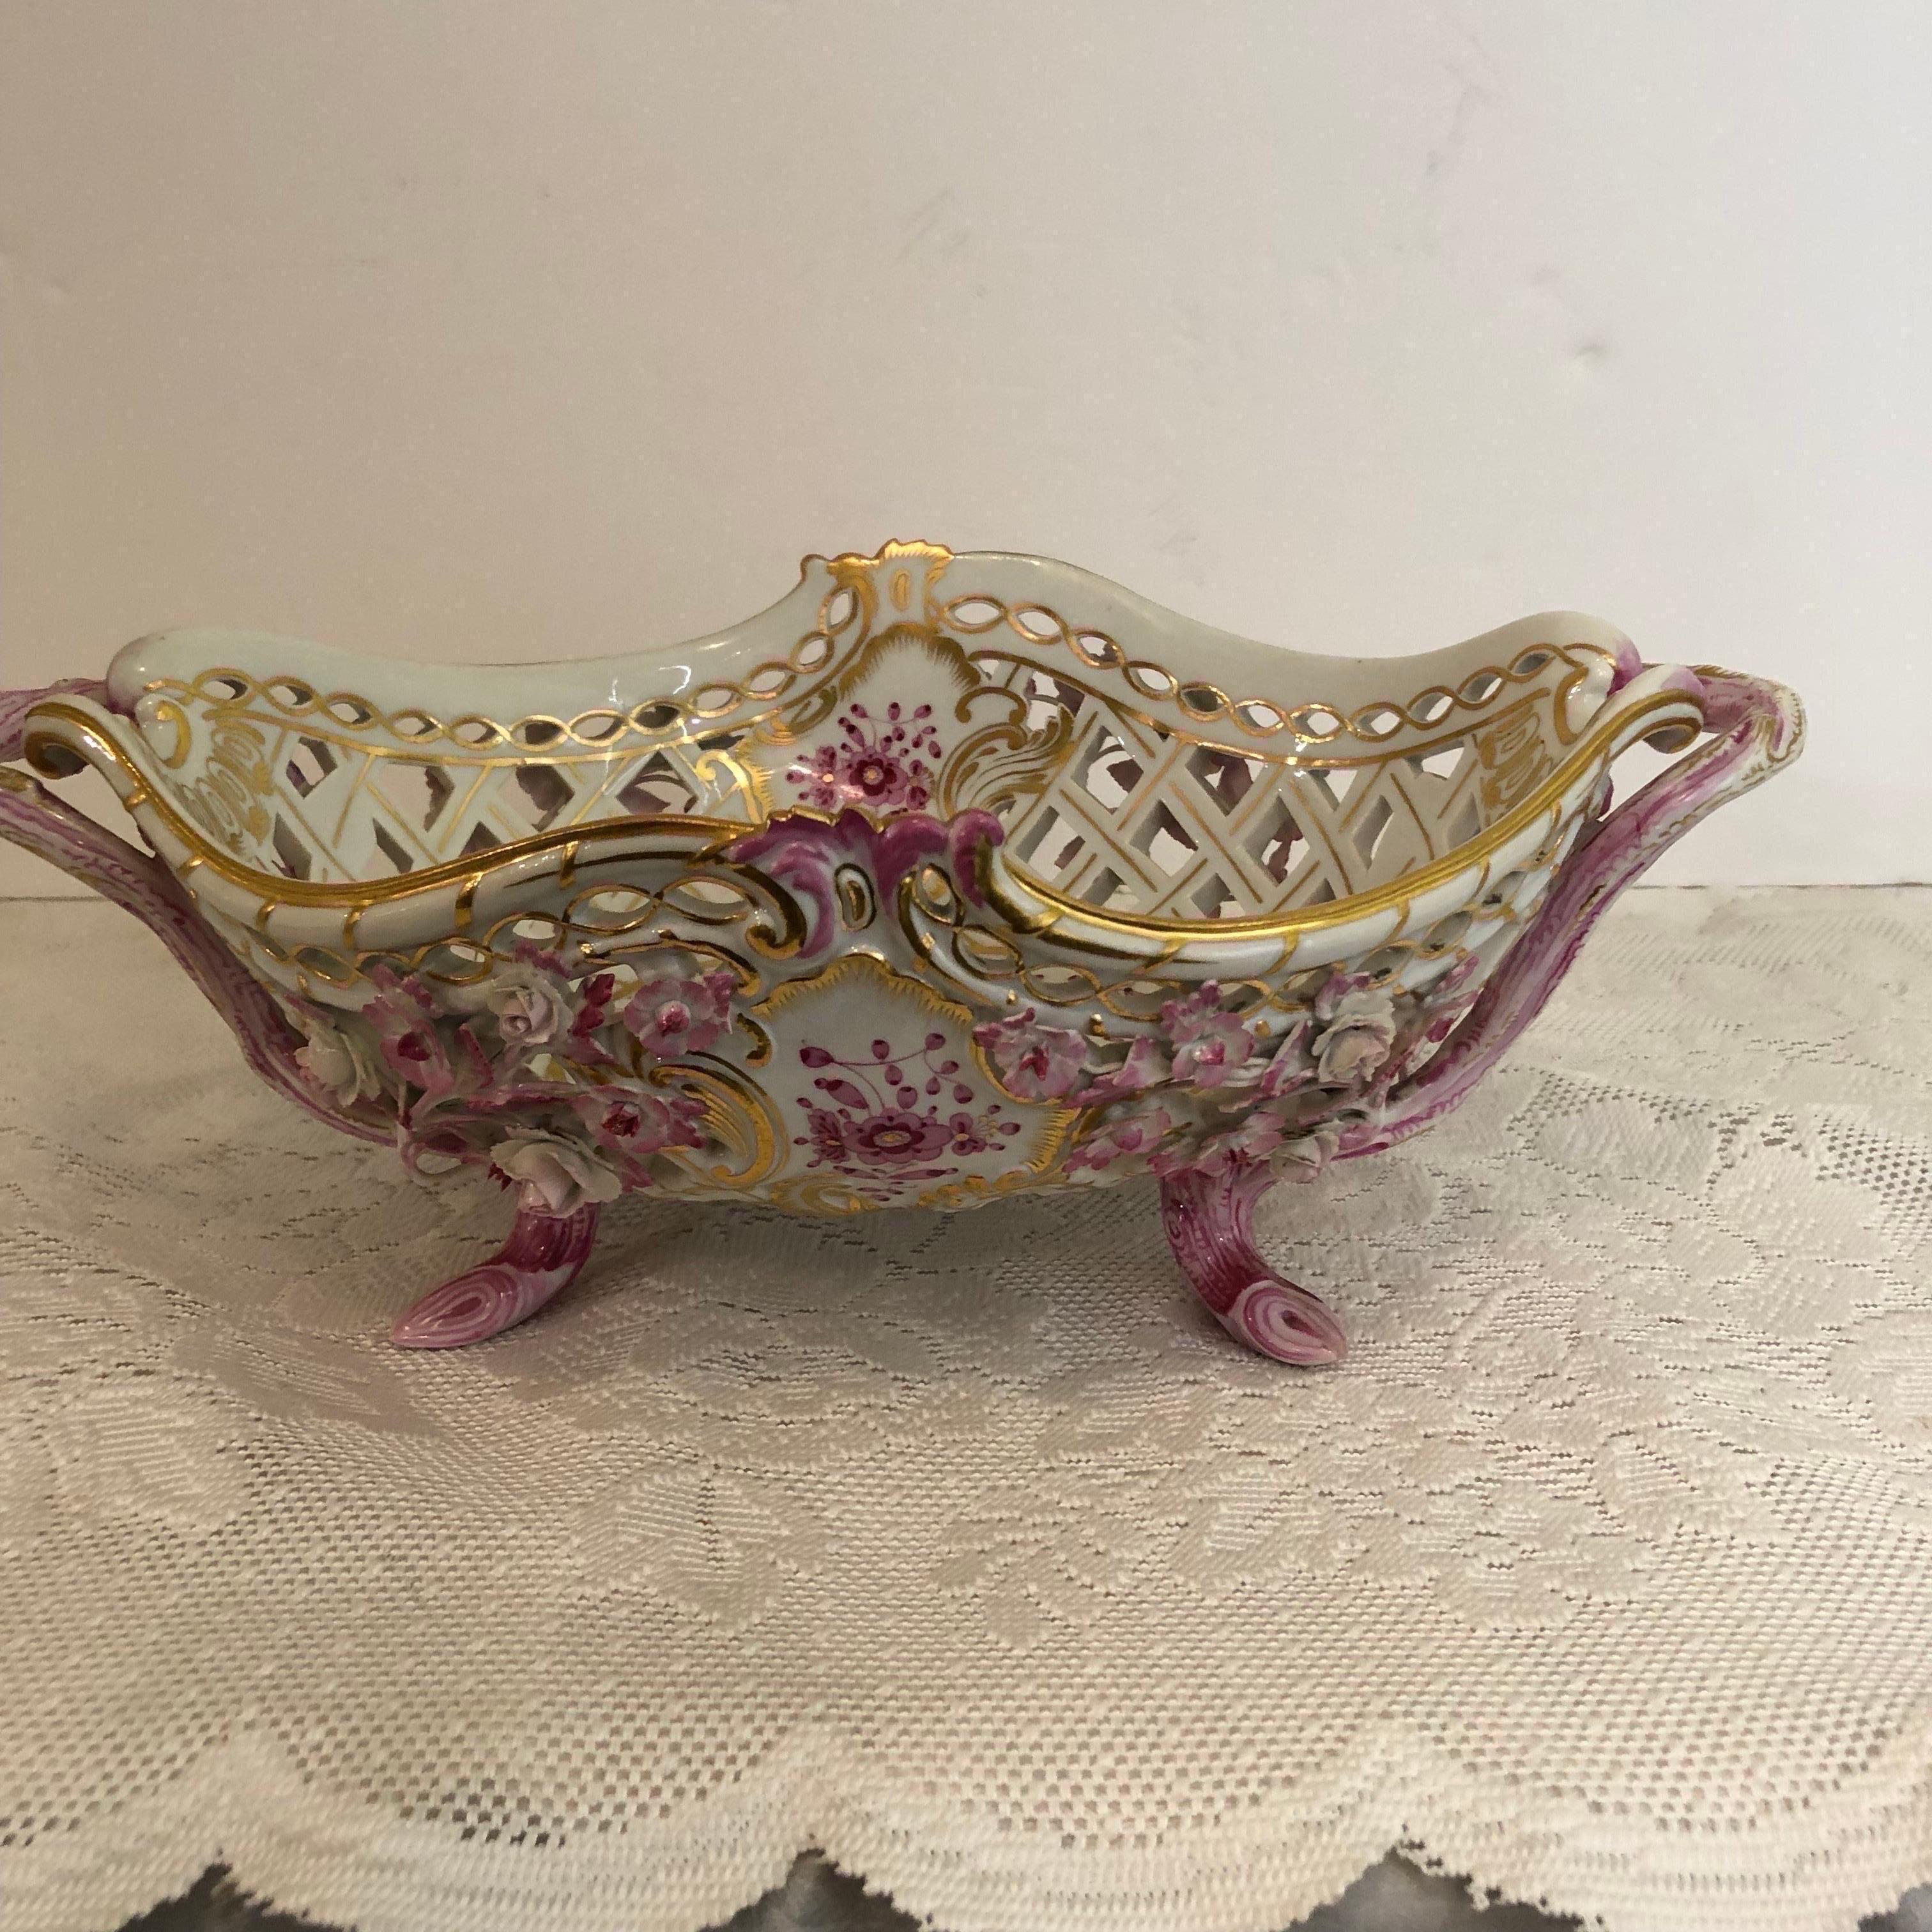 We are offering you this rare exquisite, reticulated Meissen centerpiece bowl in the beautiful purple Indian pattern. This fabulous centerpiece is encrusted with raised pink flowers all over the outside of this bowl. It has pink tree trunk shaped